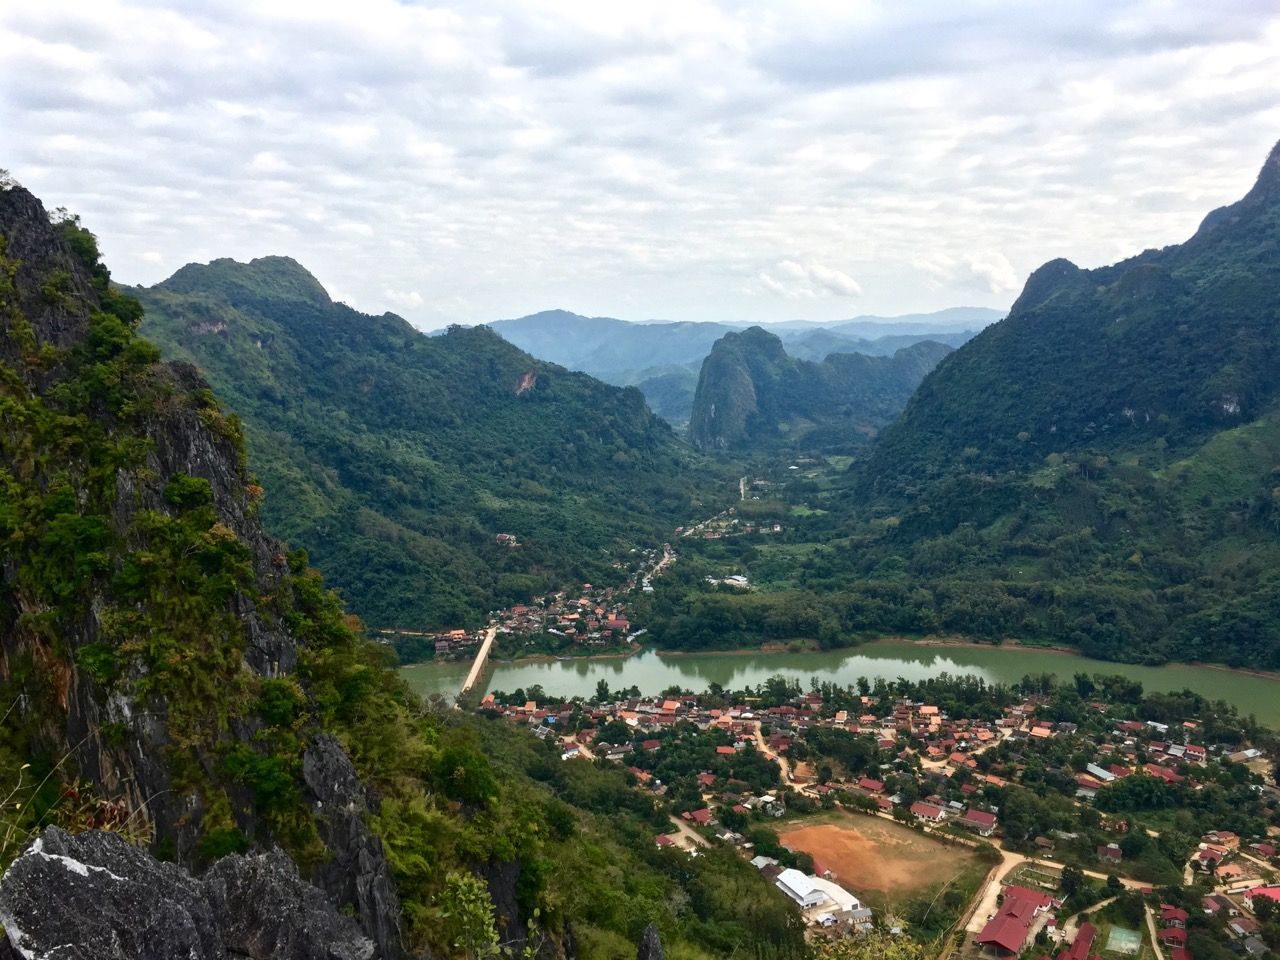 View of Nong Khiaw from the hut.